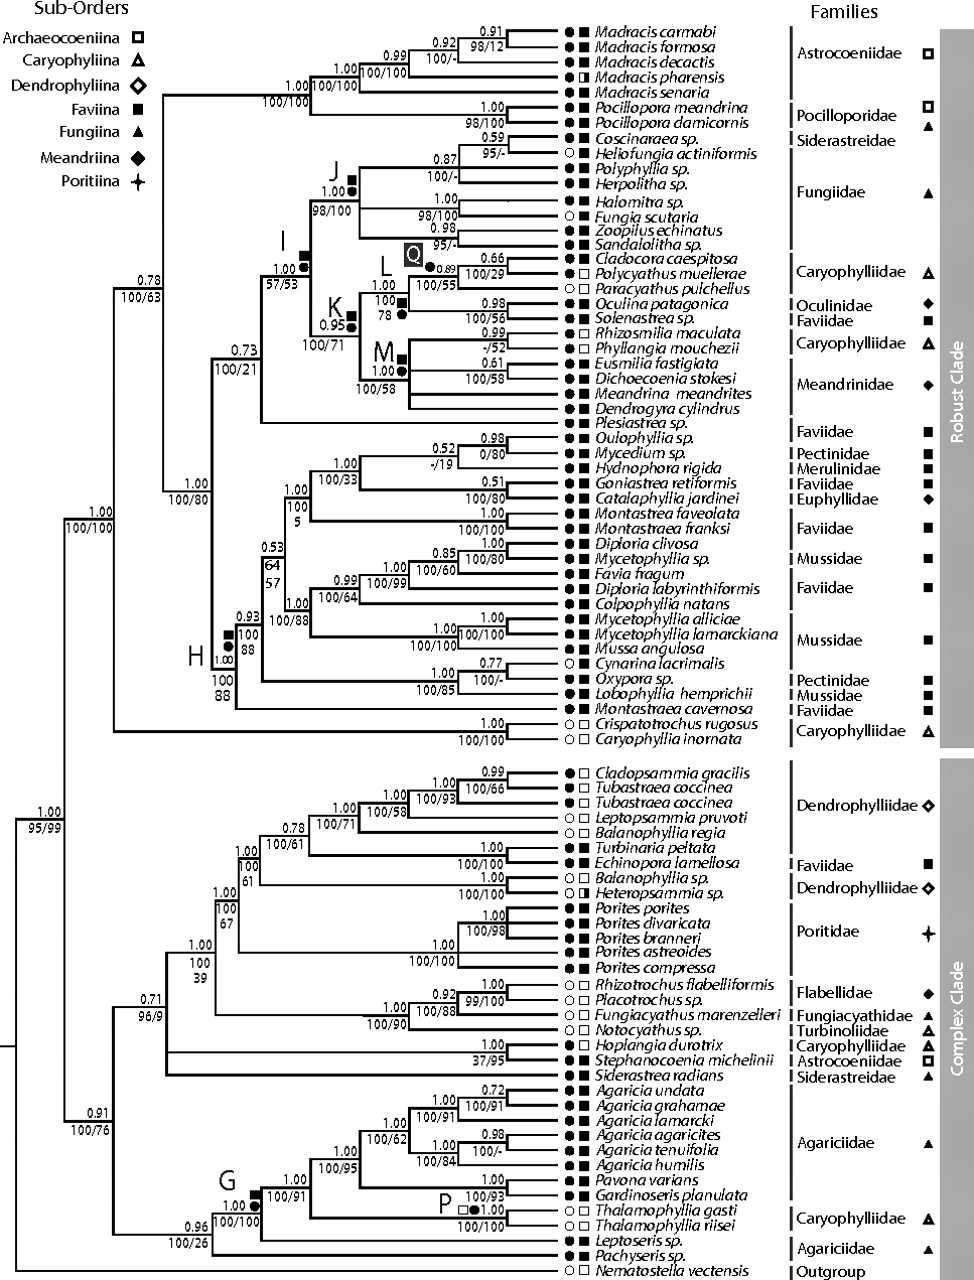 Image that shows a molecular phylogenetic tree for corals.